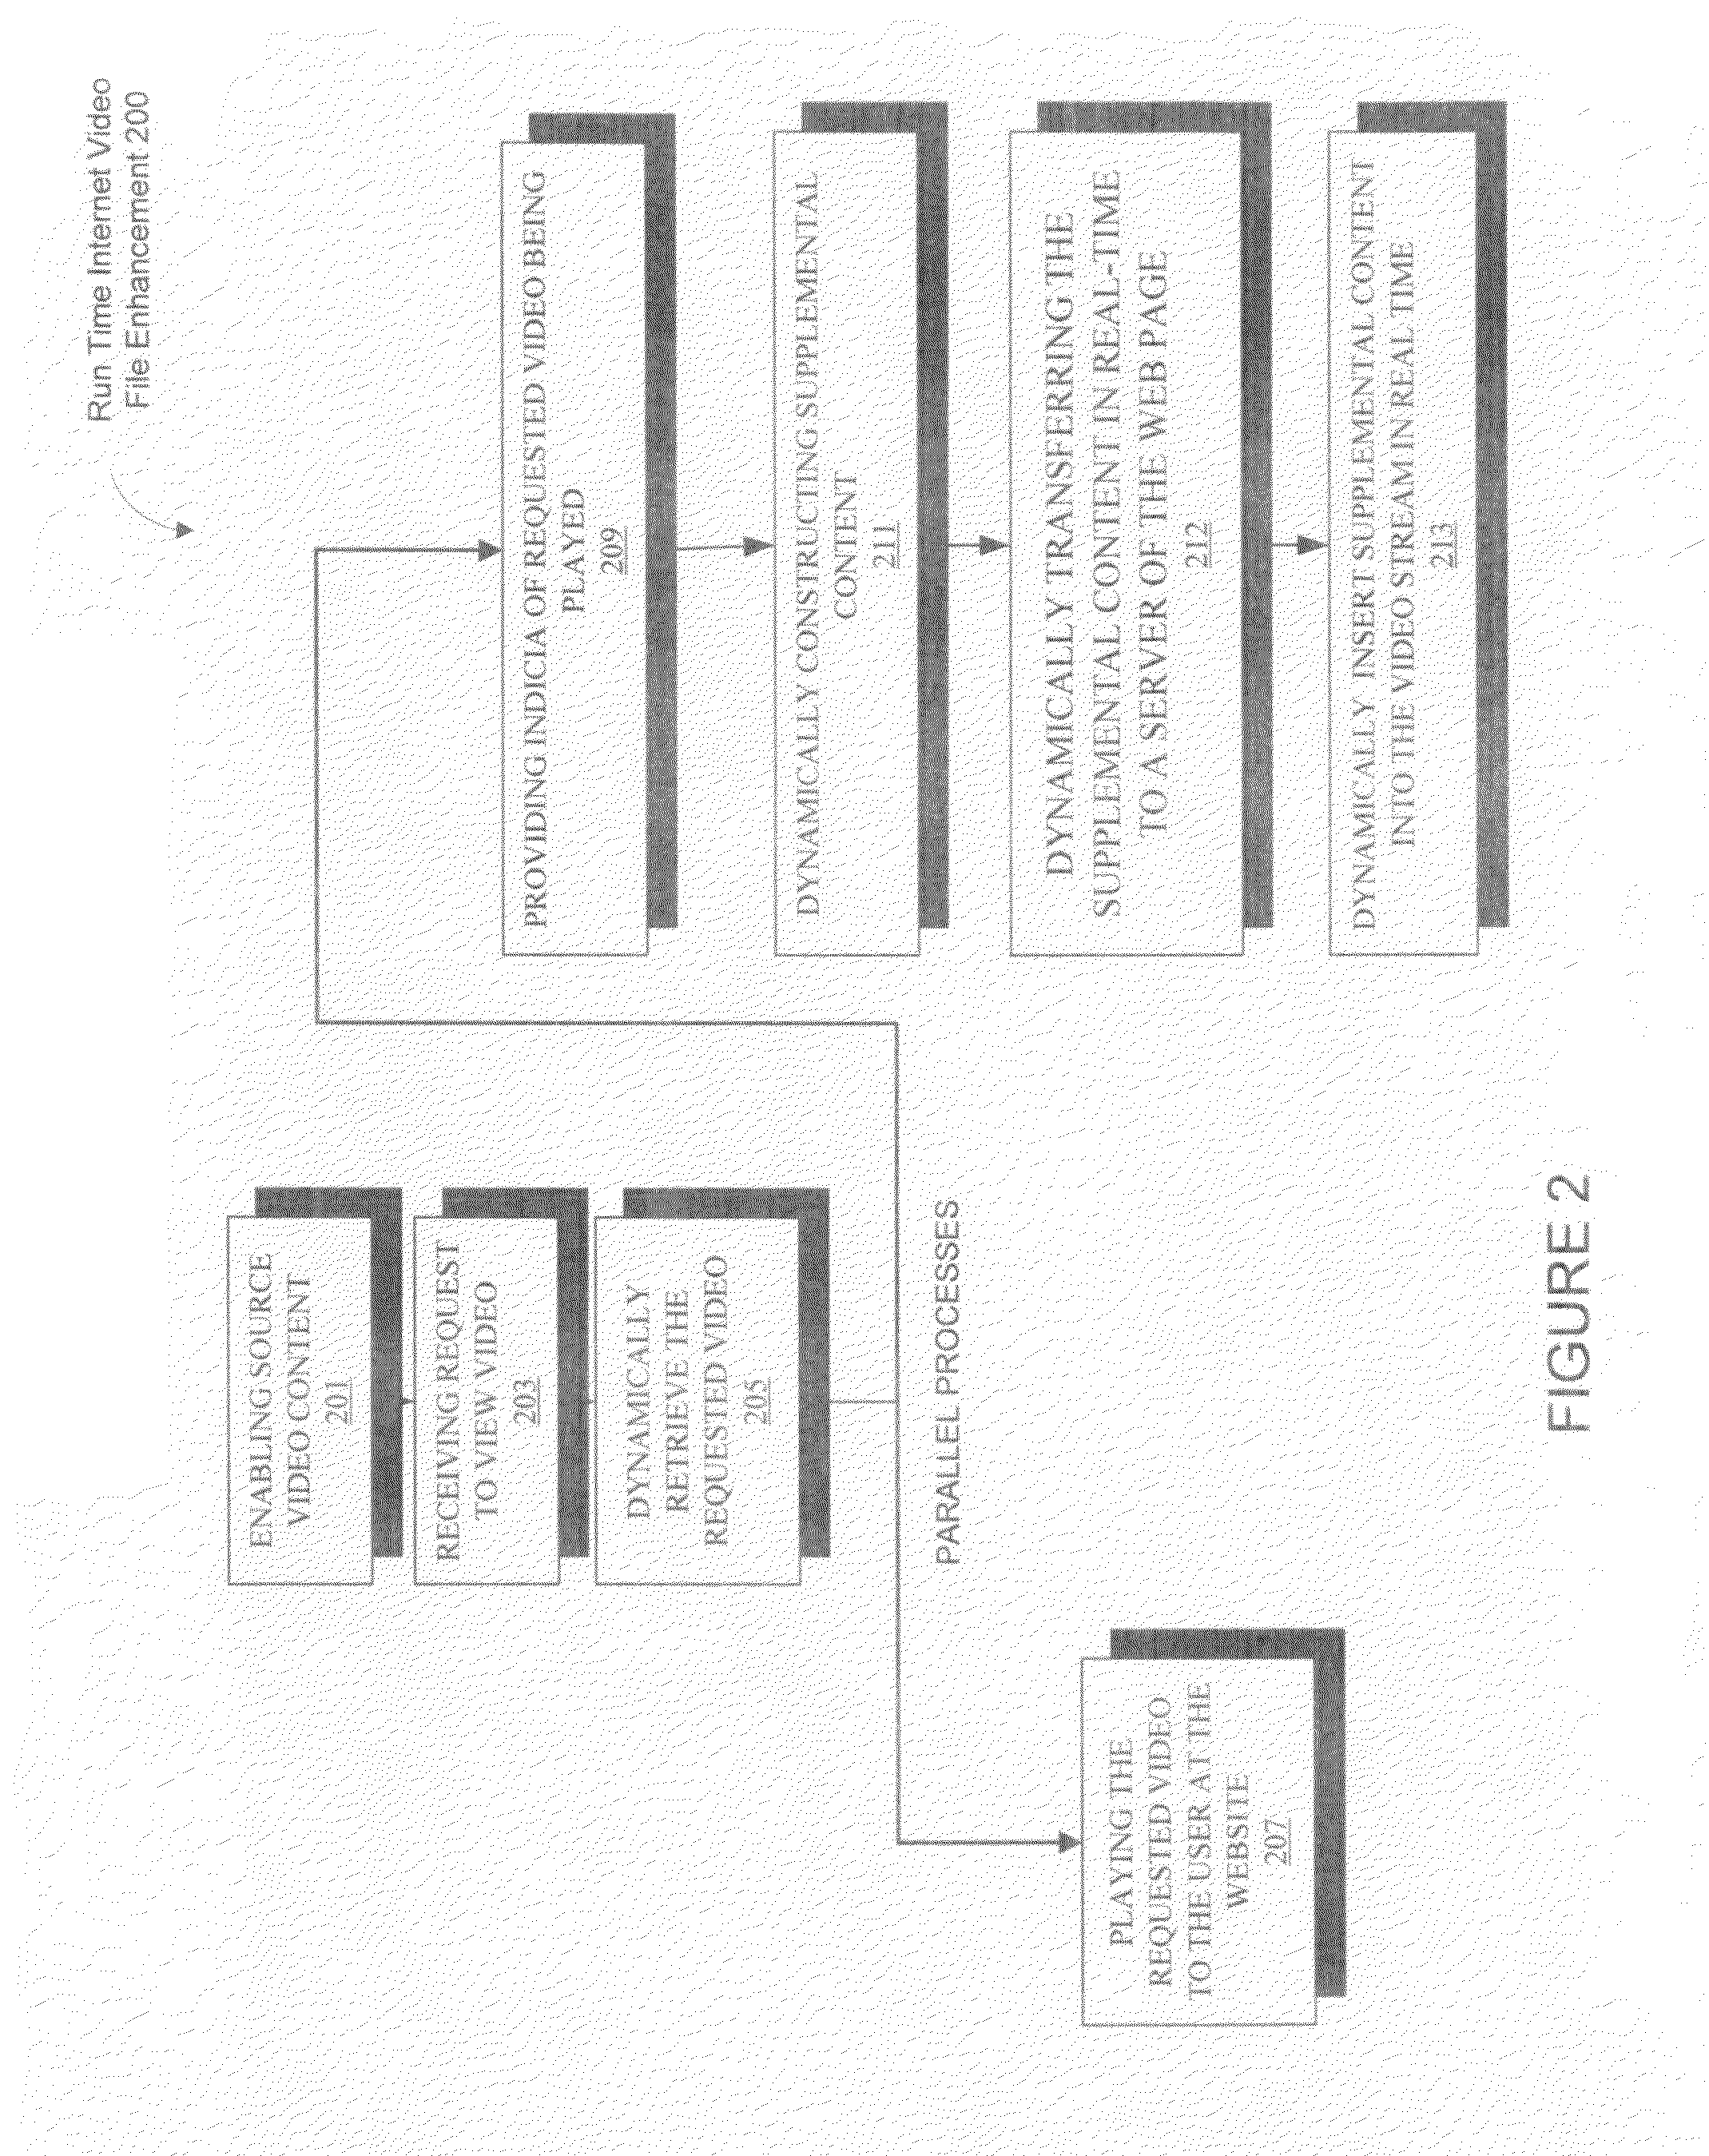 Systems and methods for providing run-time enhancement of internet video files